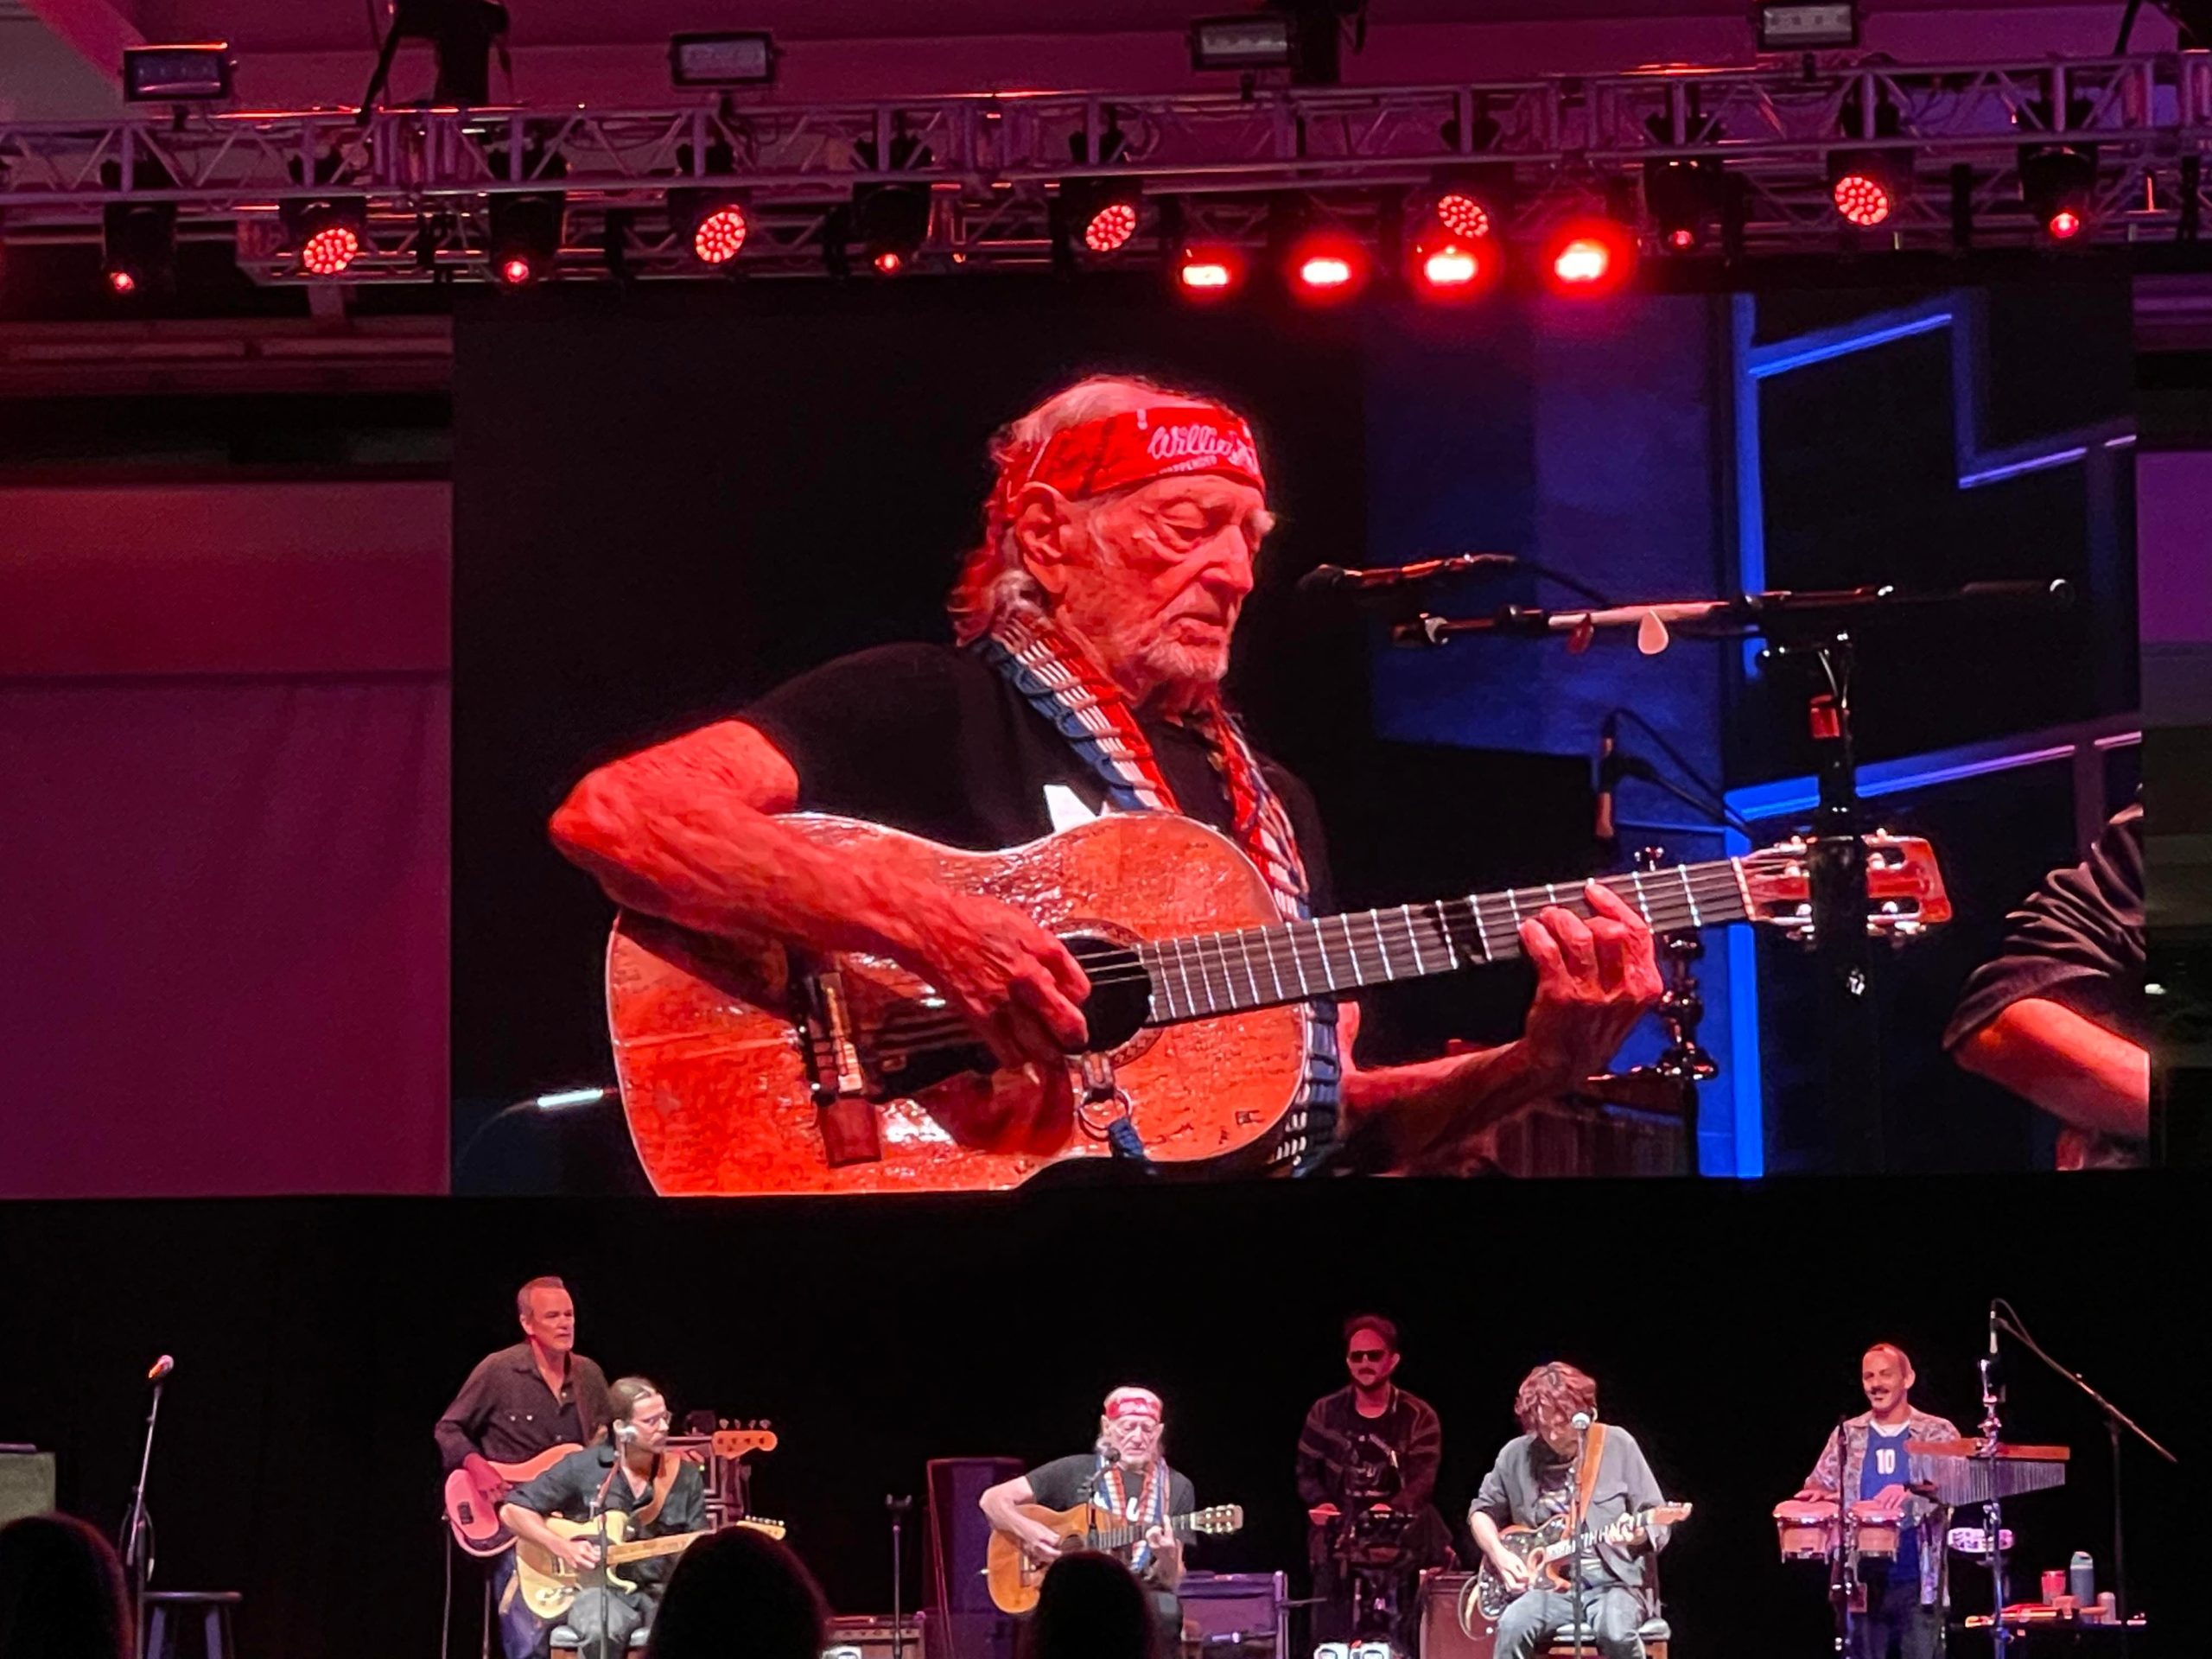 Willie Nelson & Family Holiday Concert. 12/23/22 Maui Arts & Cultural Center